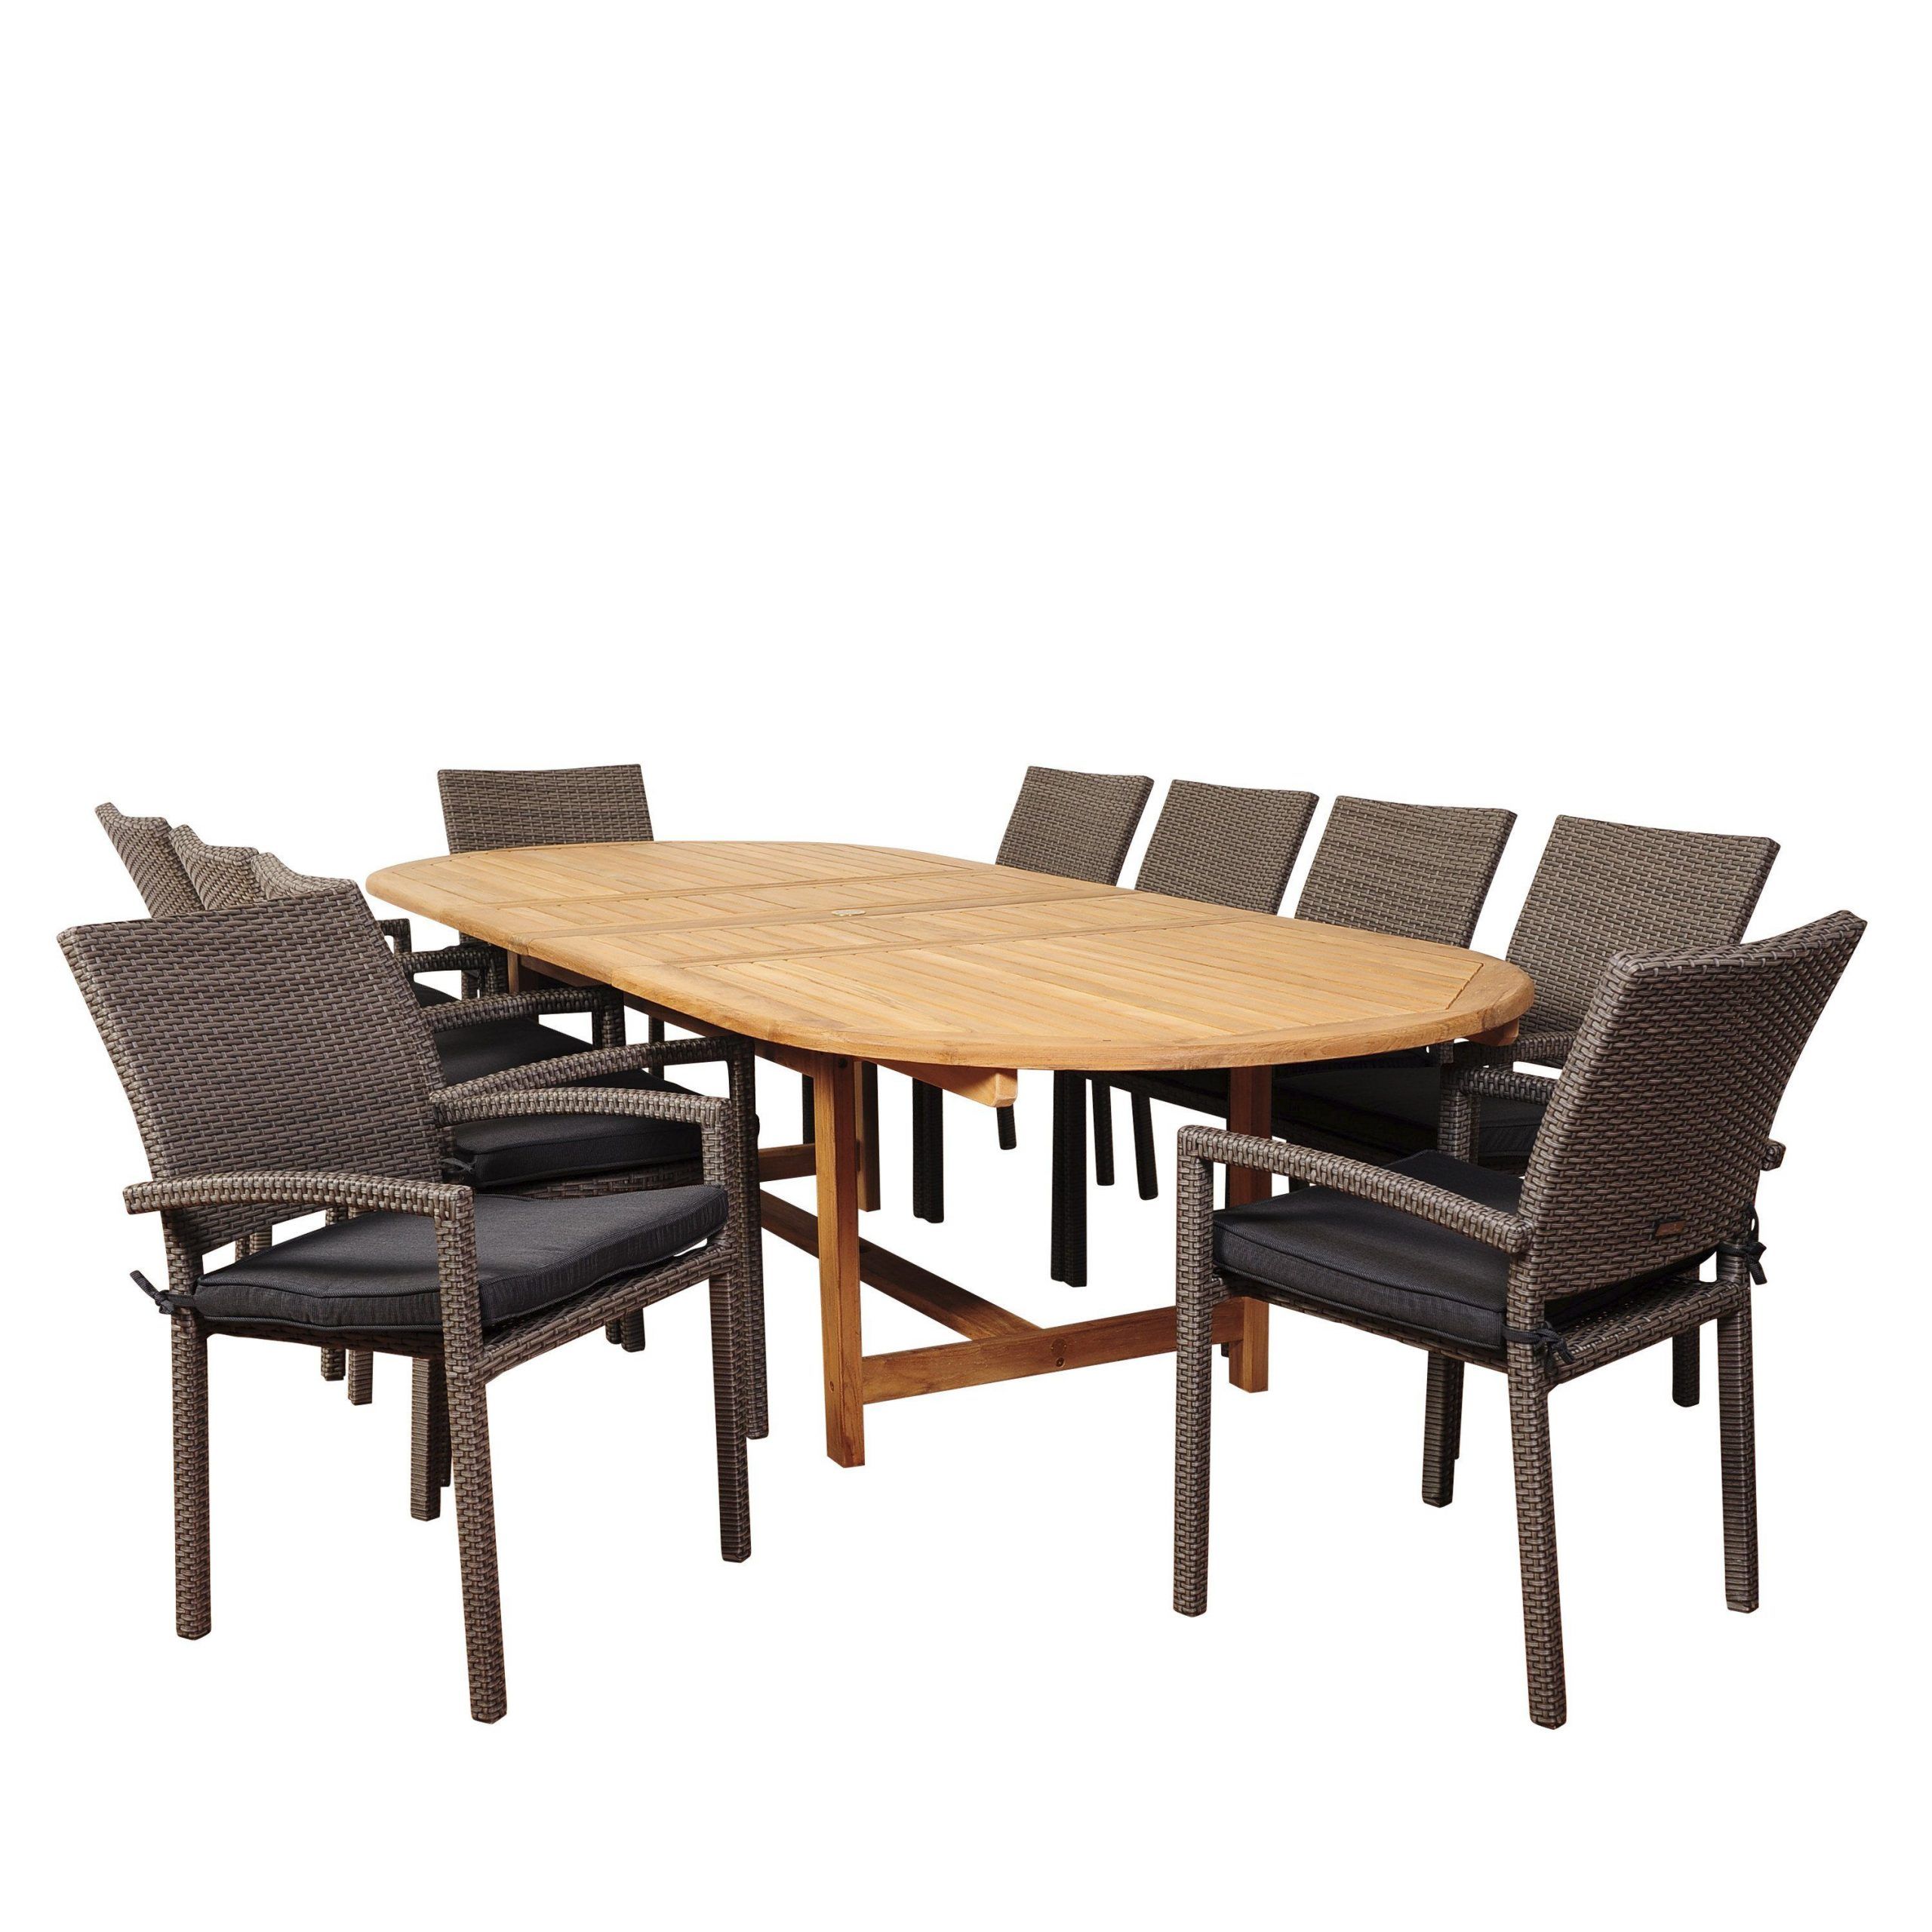 Amazonia City Villa 11 Piece Teak/wicker Double Extendable Oval Dining With Well Liked Gray Extendable Patio Dining Sets (View 13 of 15)